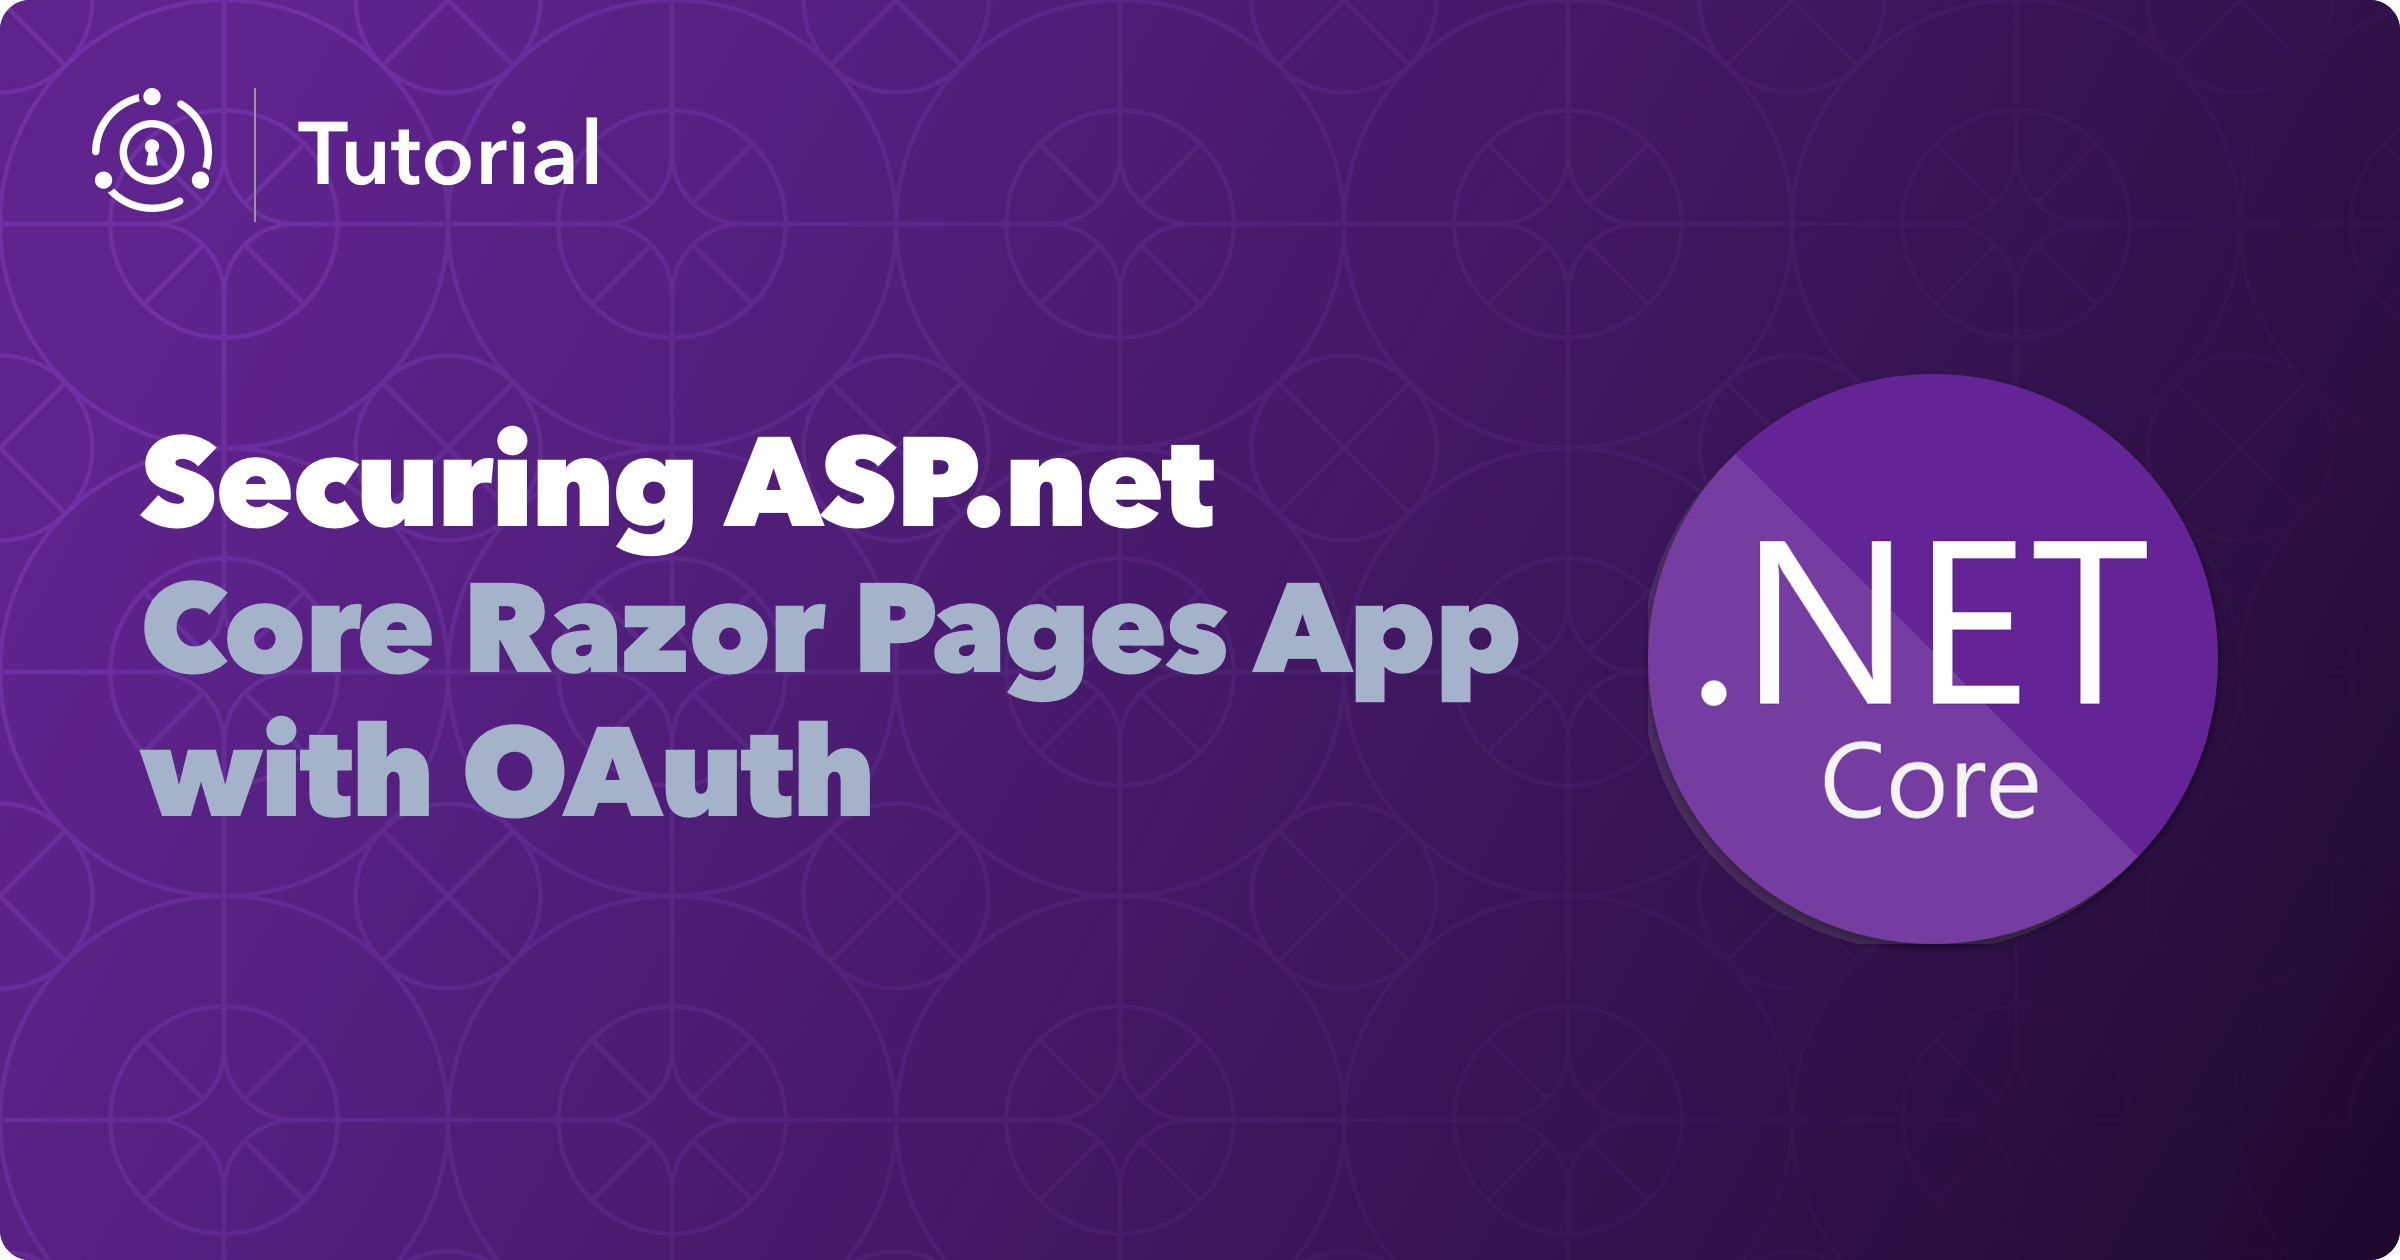 Securing an ASP.NET Core Razor Pages app with OAuth